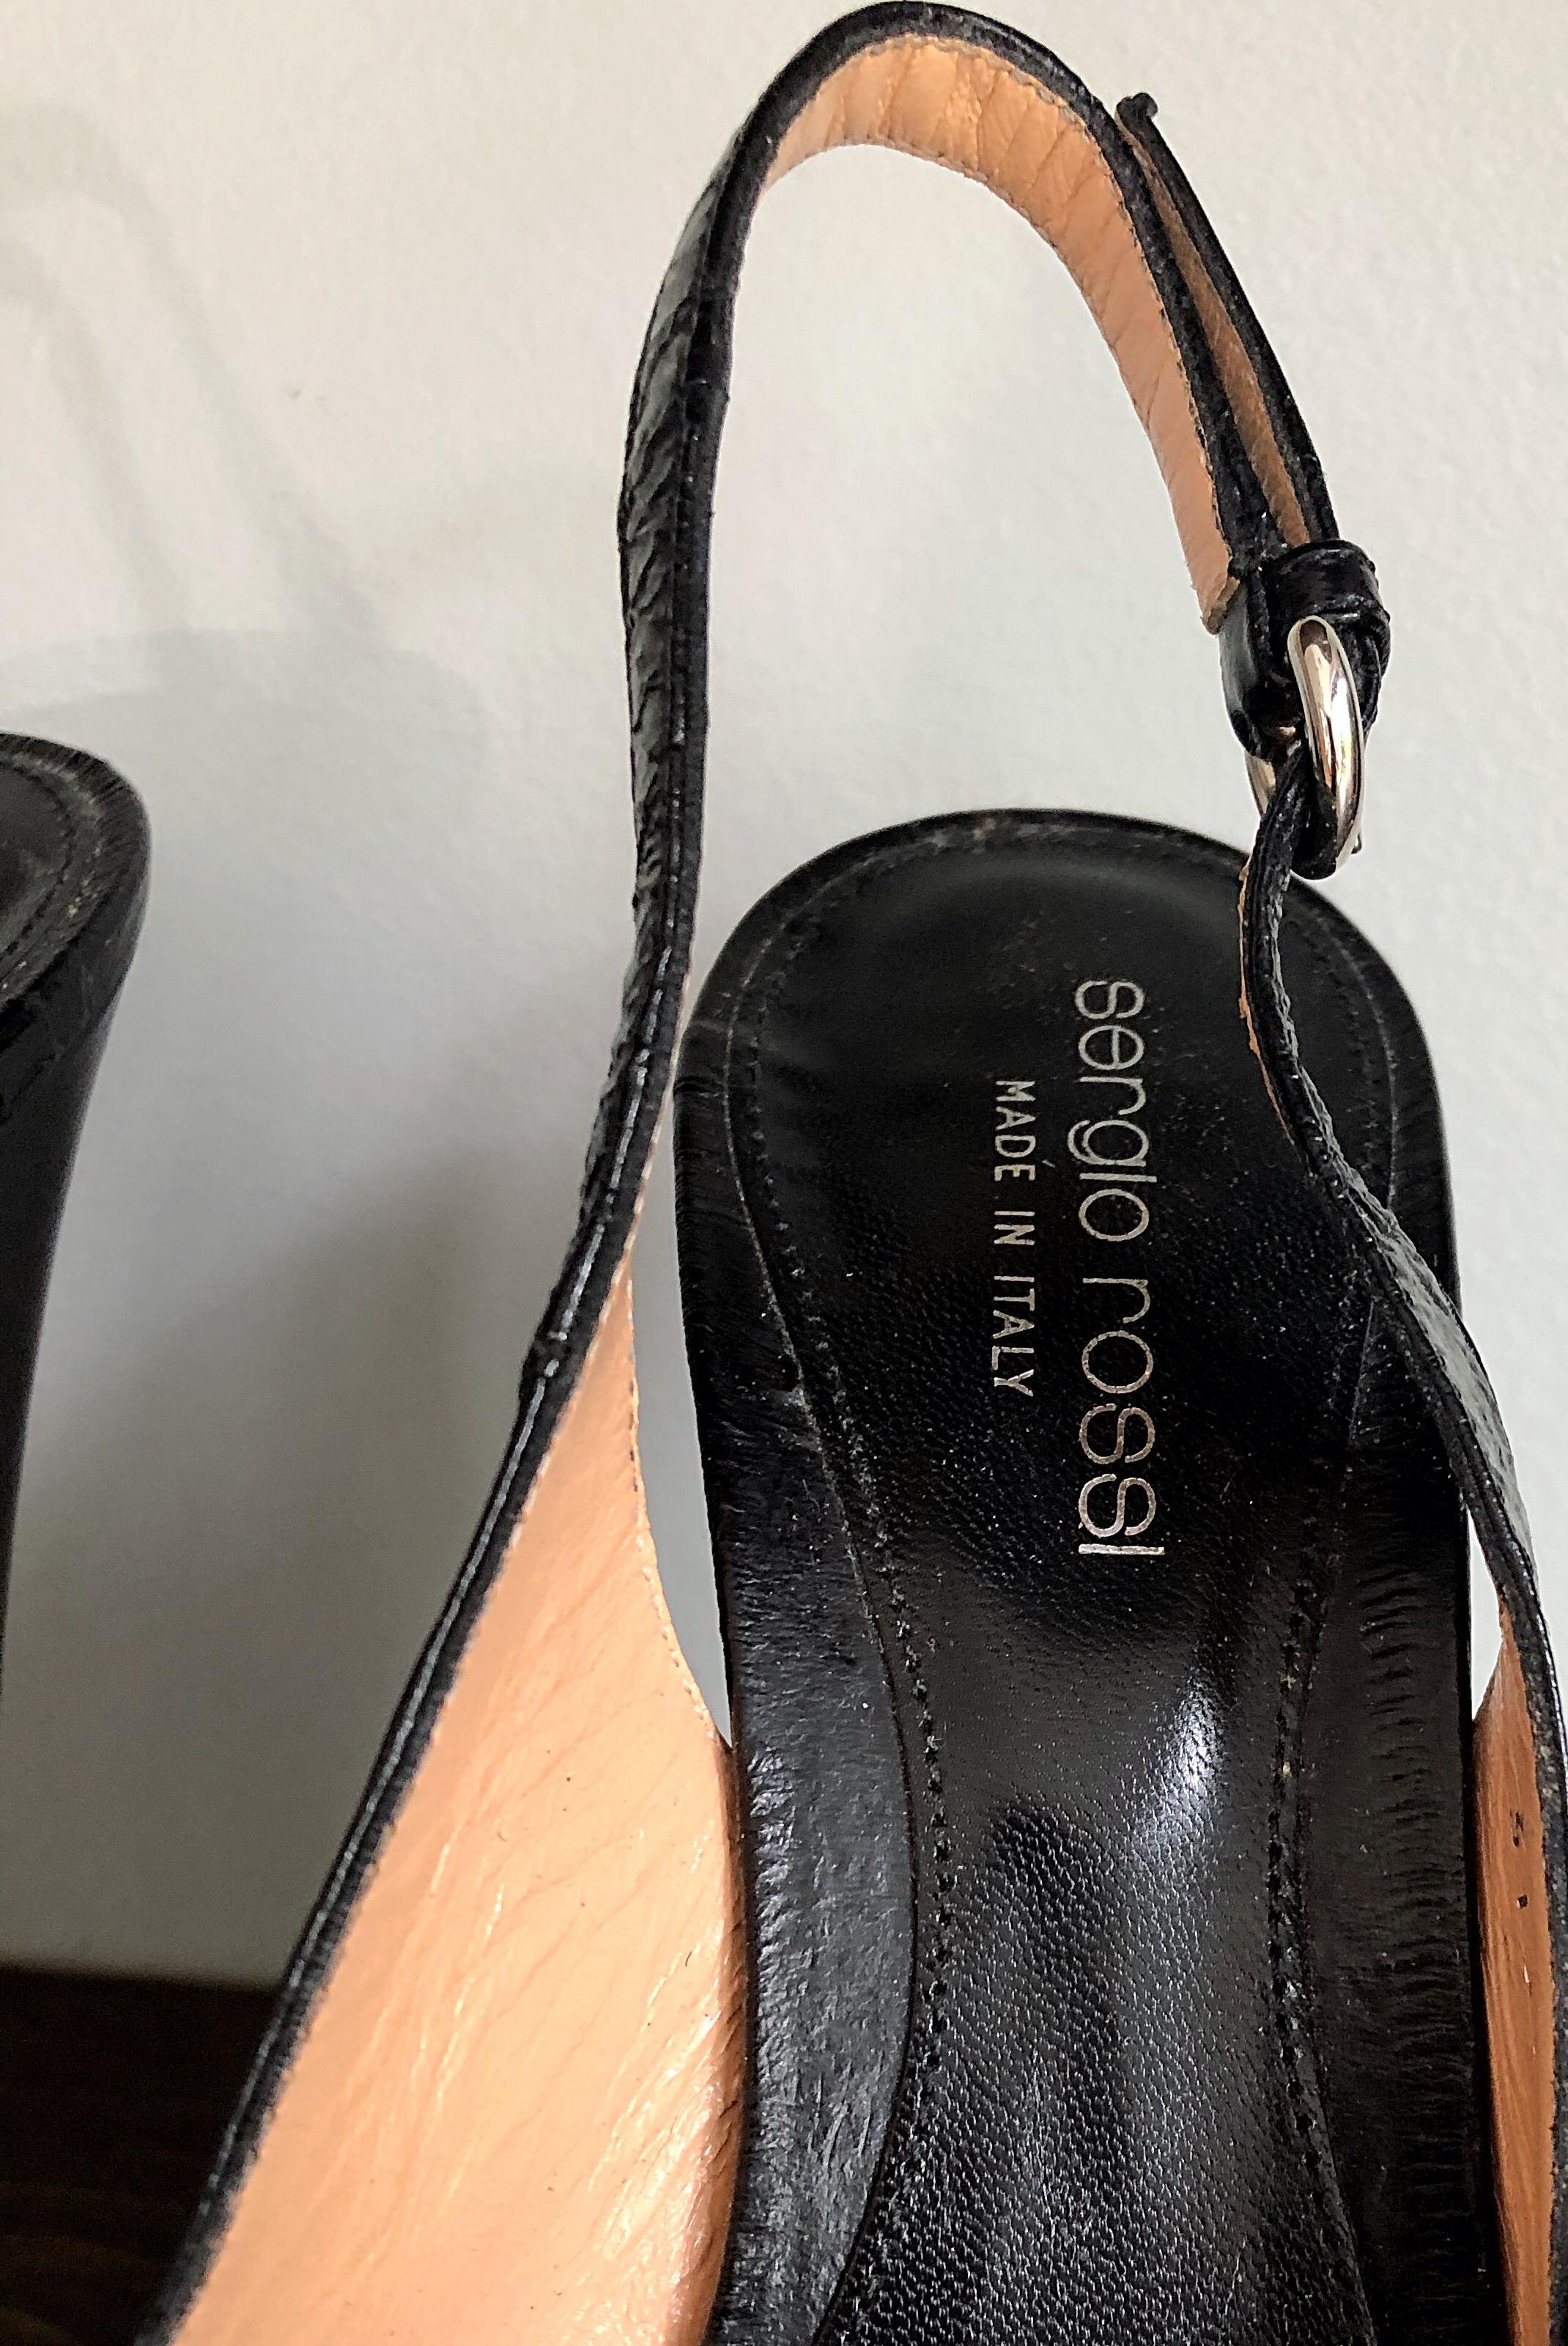 Beautiful SERGIO ROSSI black eel skin and leather platform high heels in Size 36 / US 6 ! Stacked platforms. Make these beauties easy and comfortable to wear all day. Slingback style with adjustable straps. Can easily be dressed up or down. Great